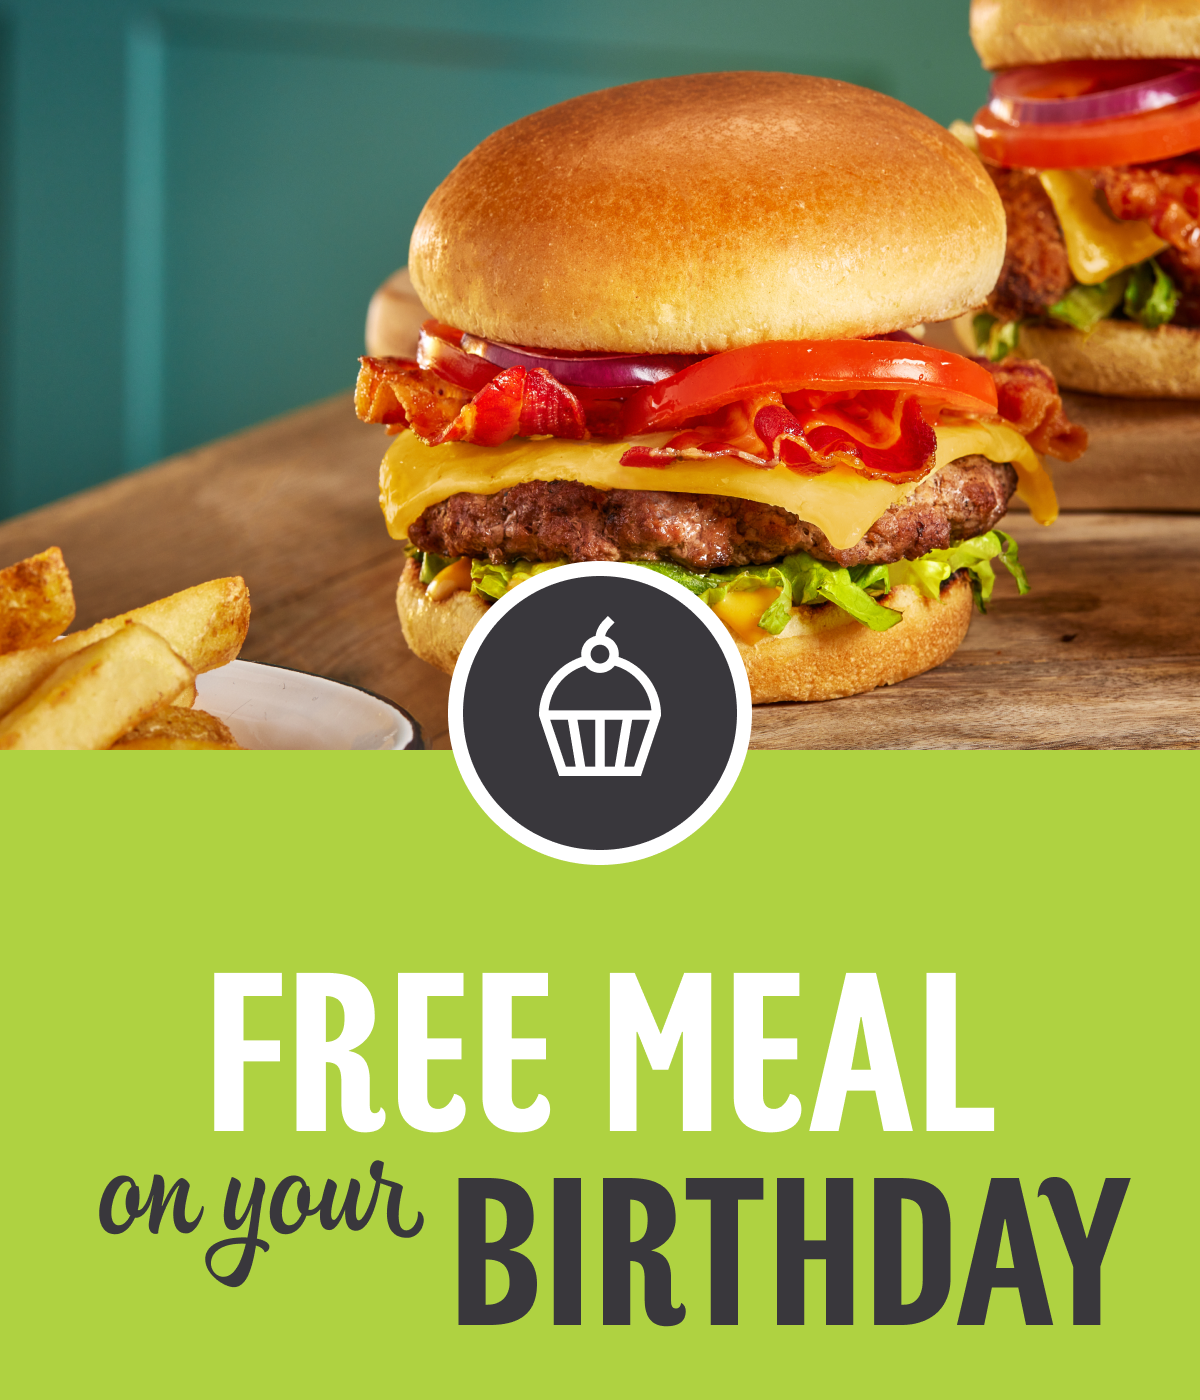 500 points gets you... 2 free kids meals